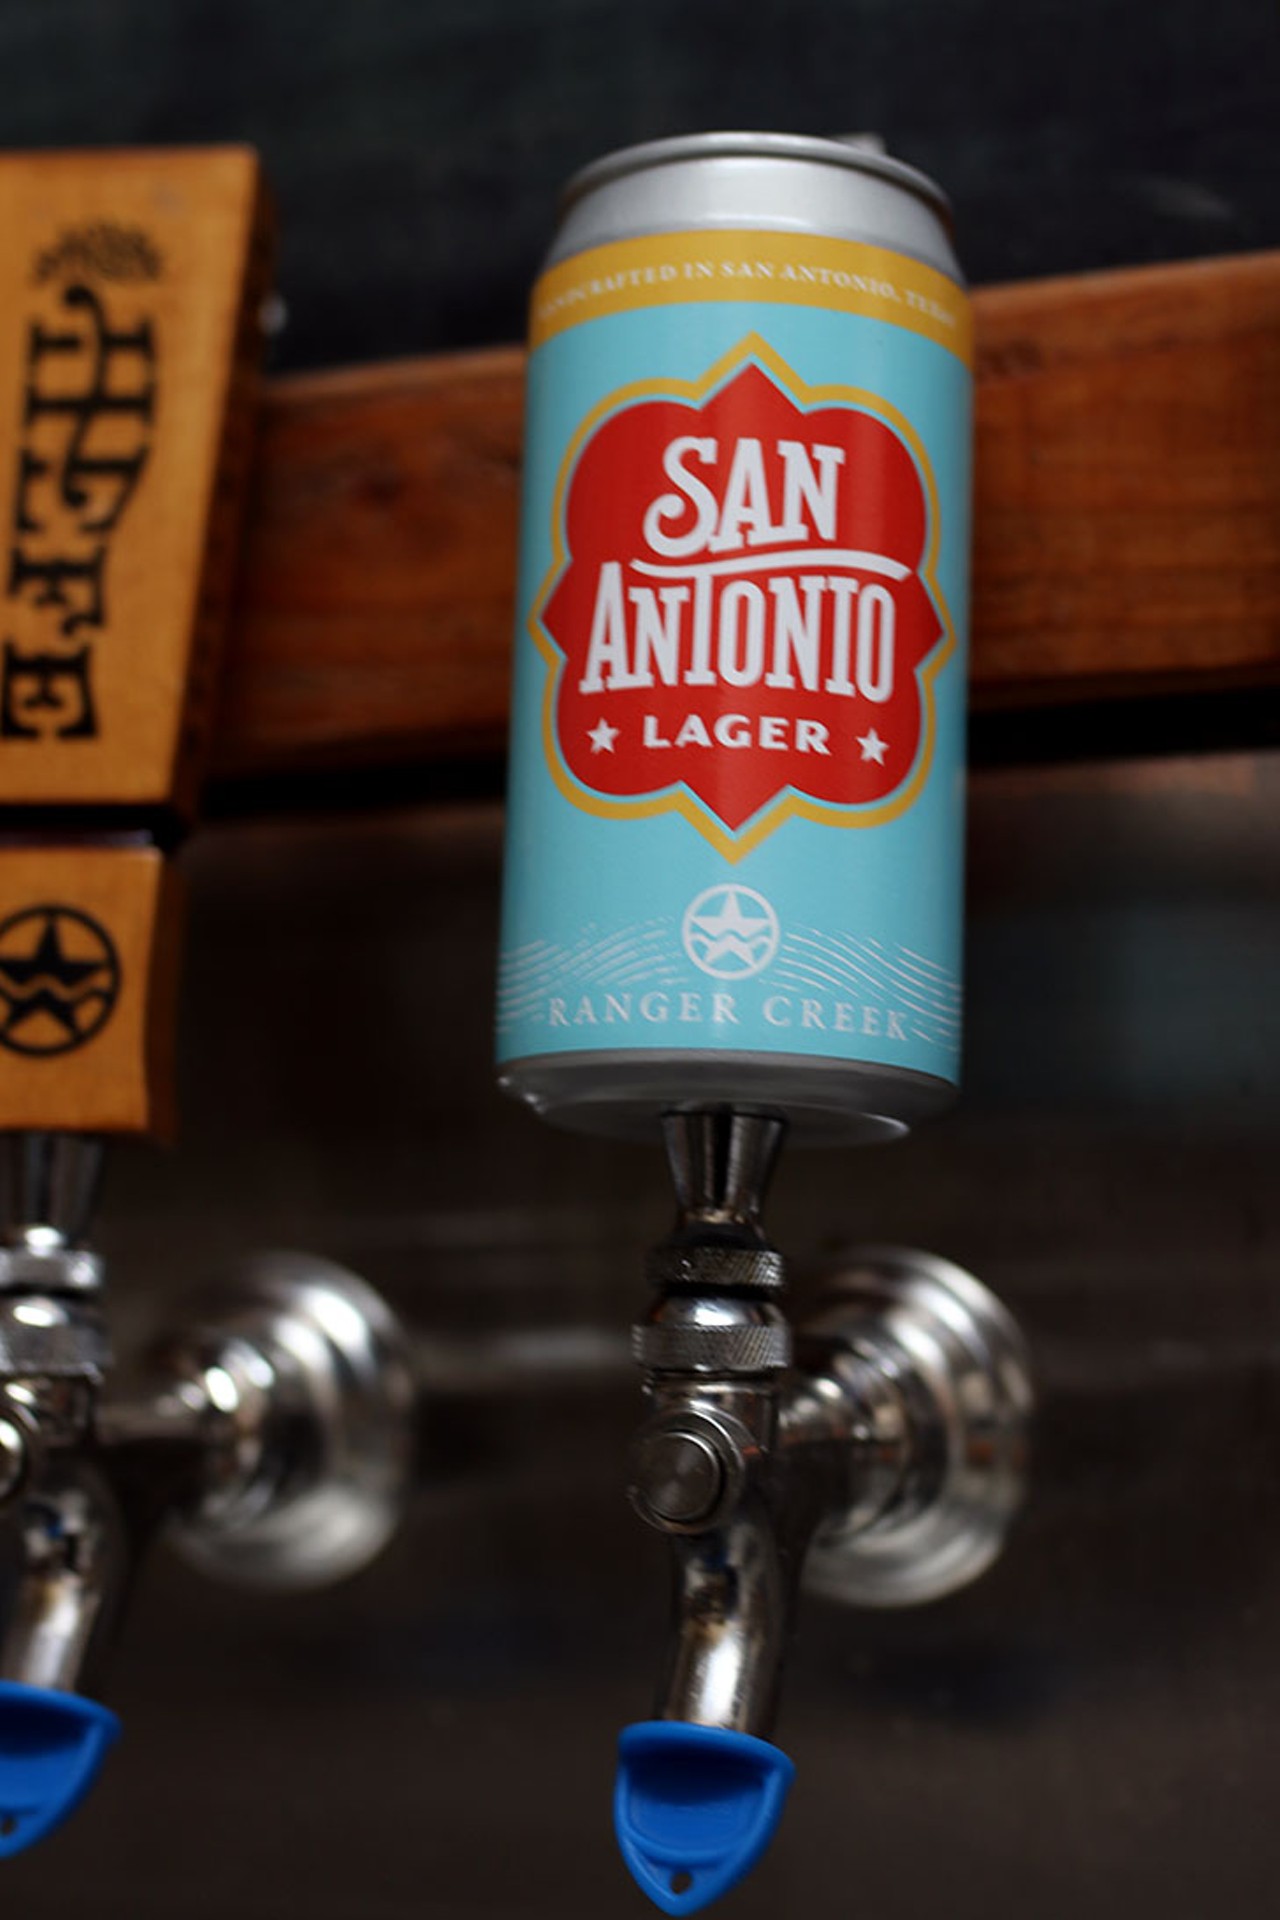 Best Moments from San Antonio Lager Launch at Ranger Creek